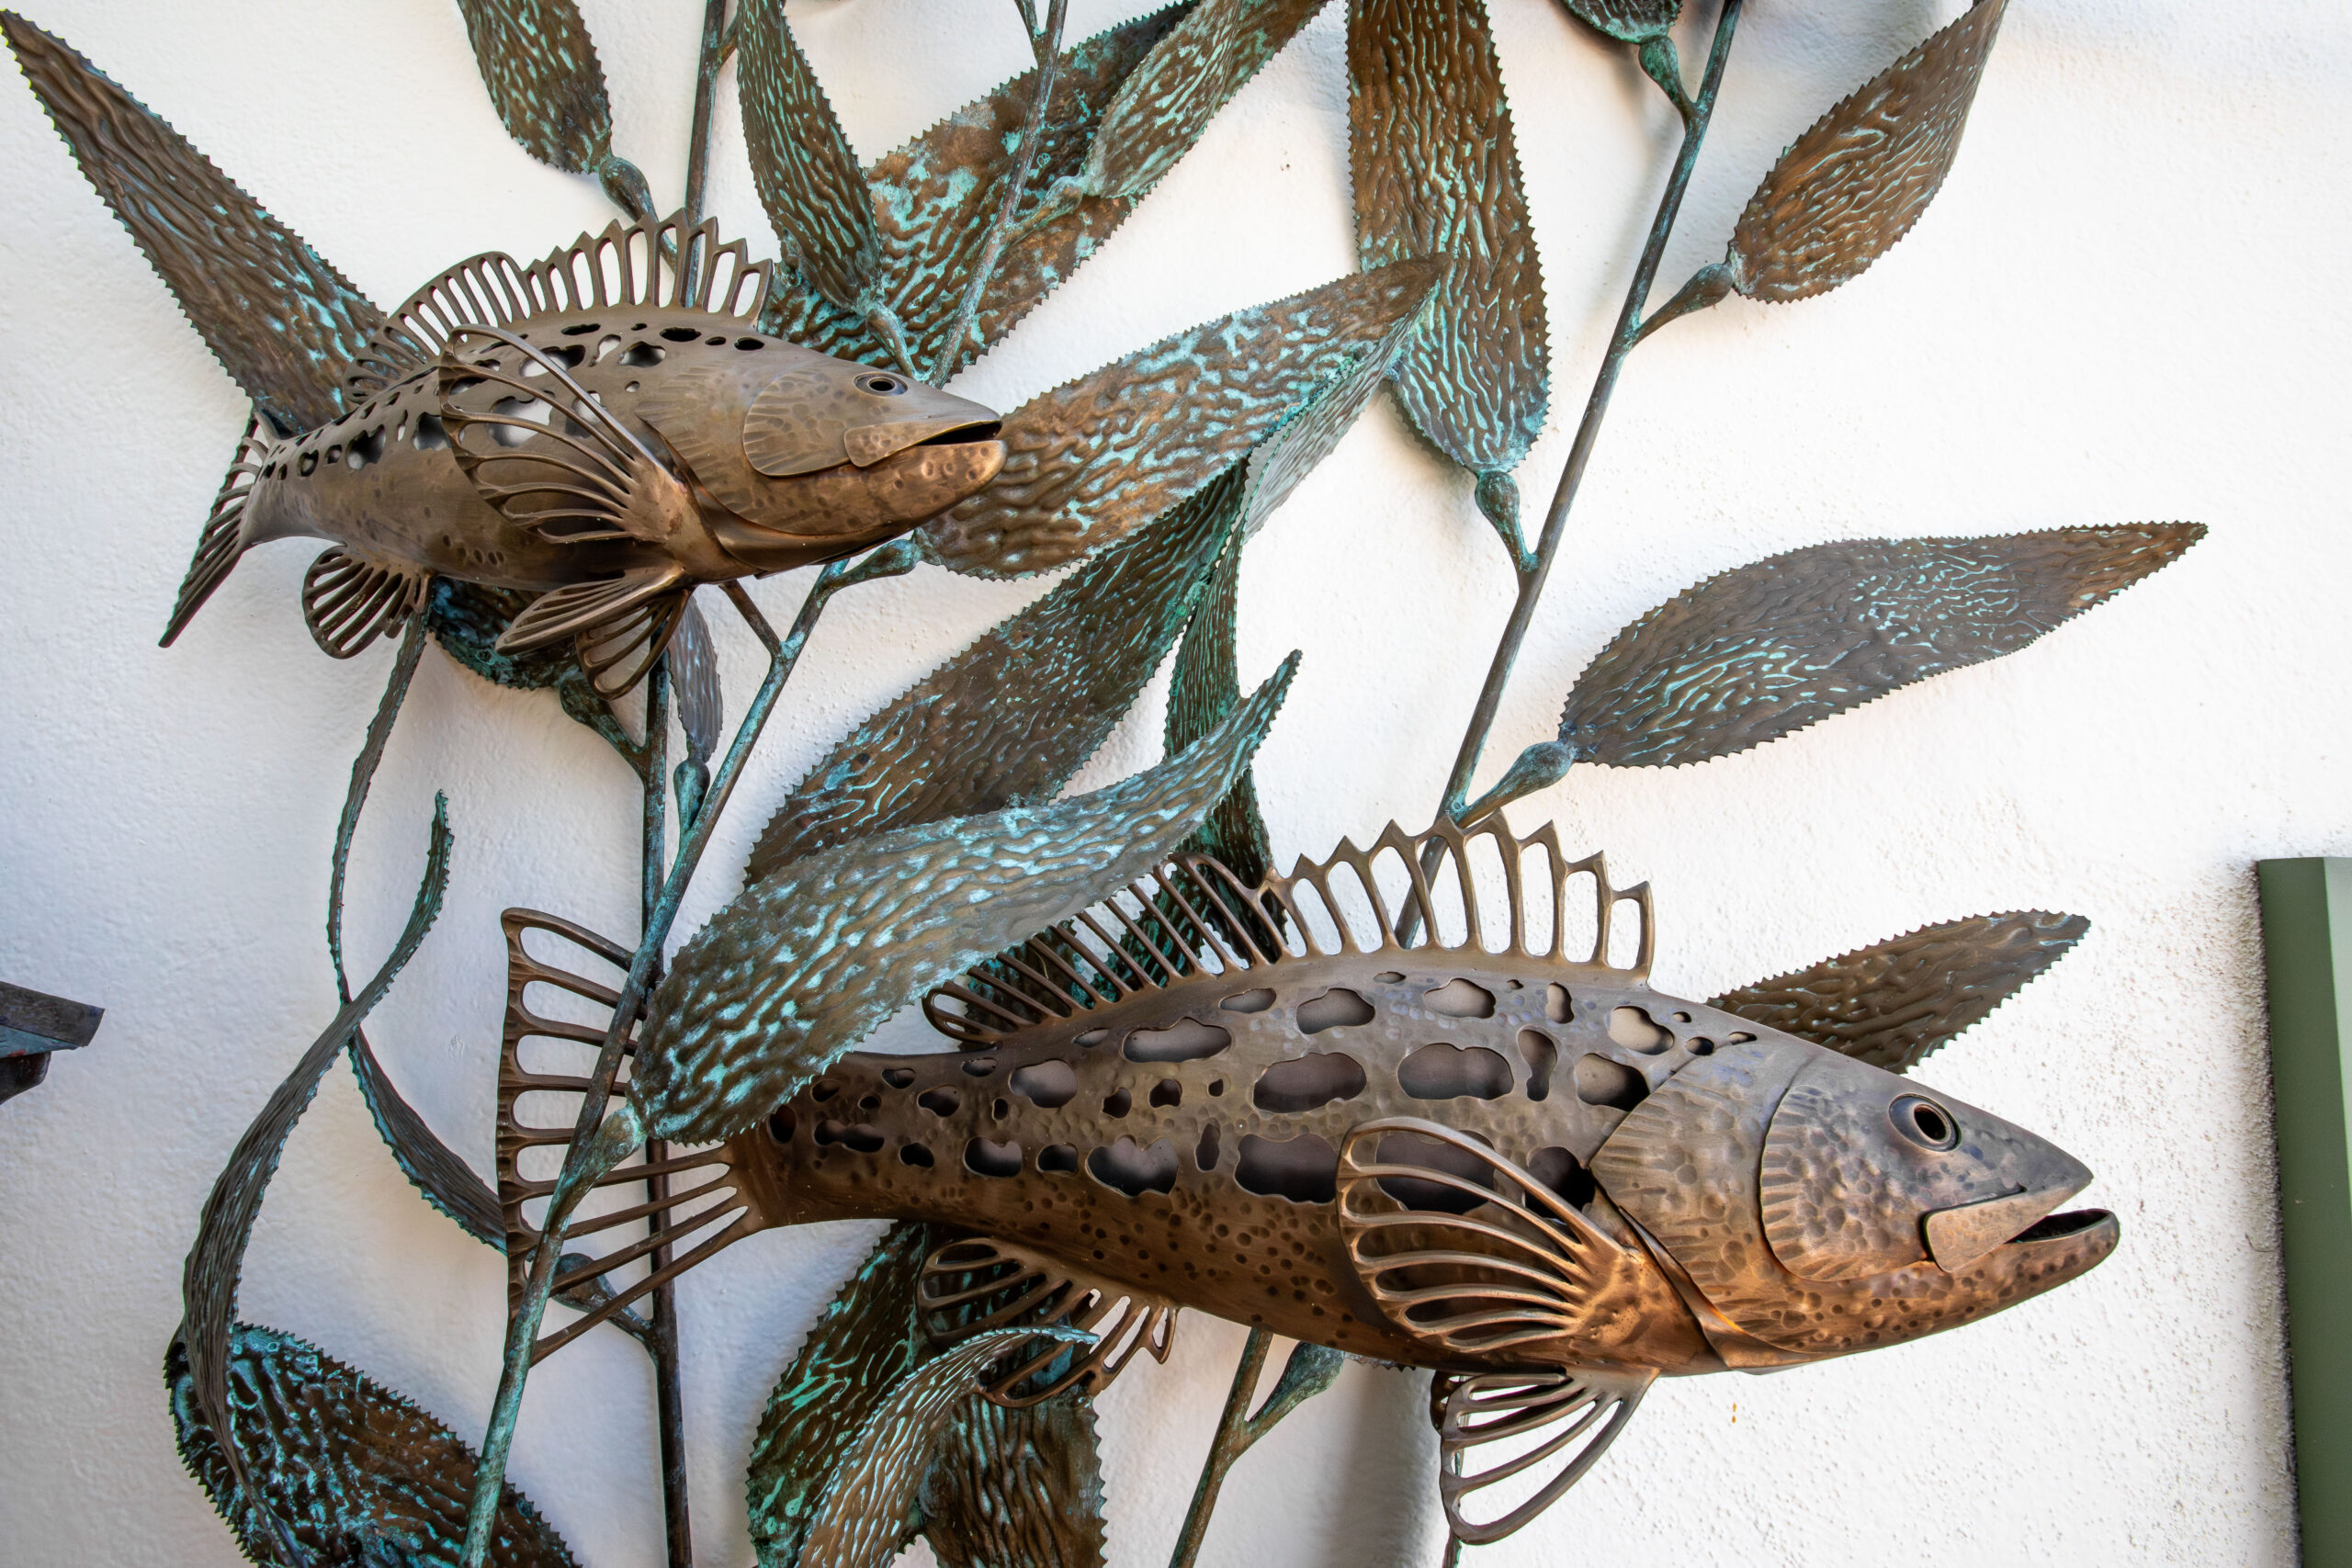 Hammered and welded bronze calico bass sculpture